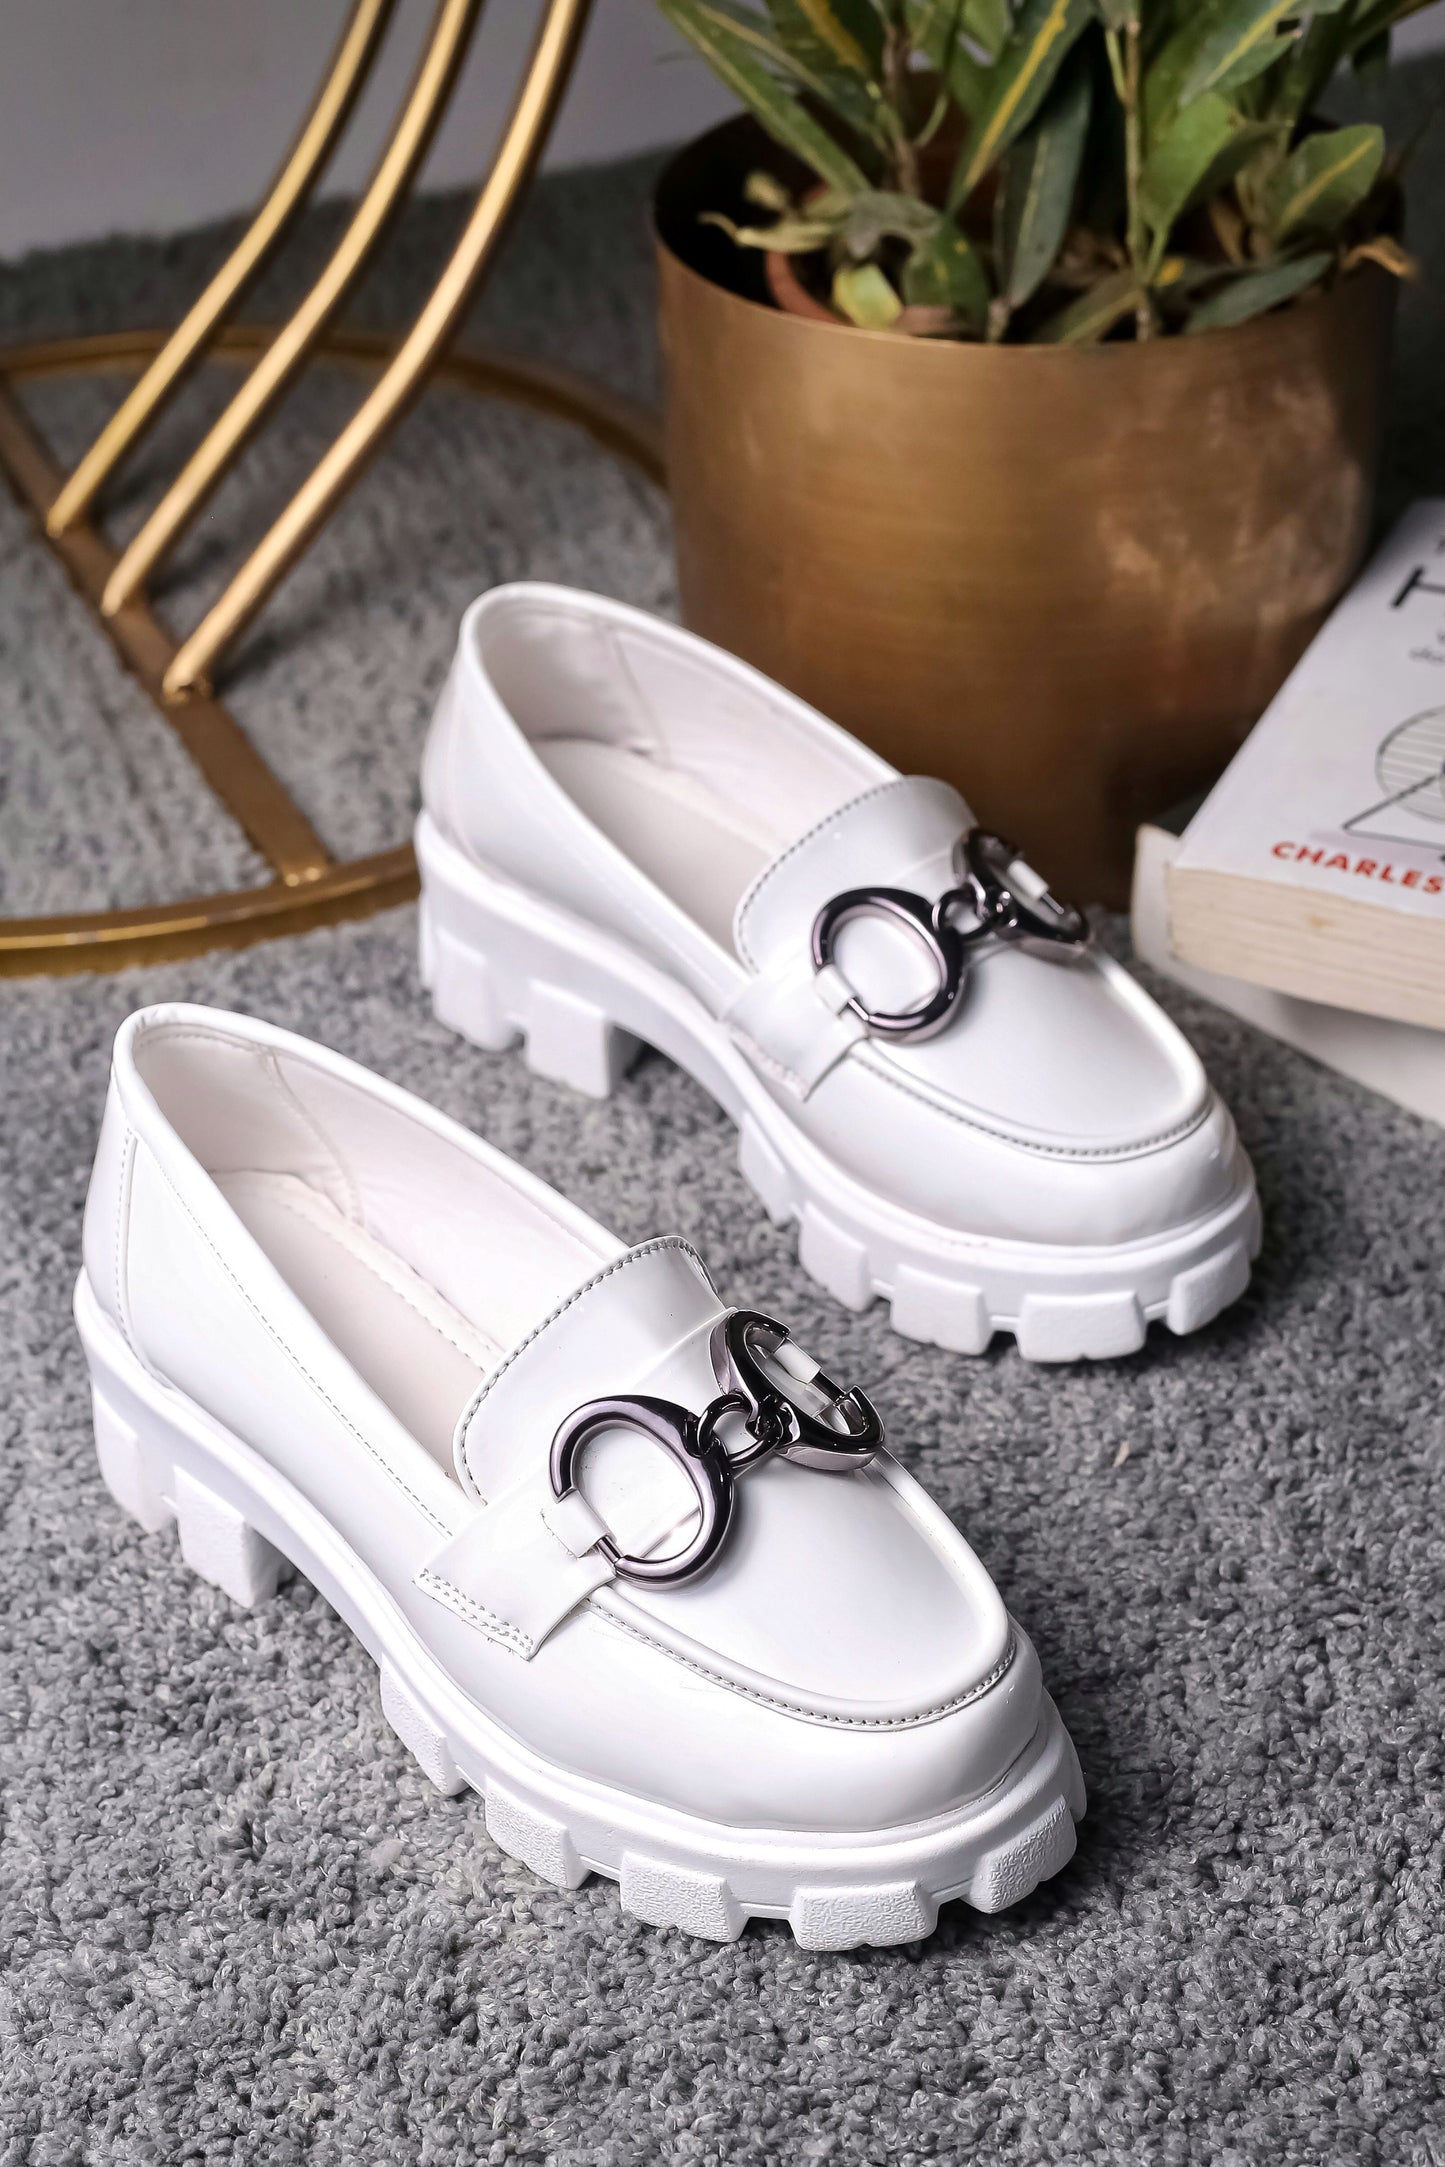 Brauch White Patent Embellished Loafer Shoe